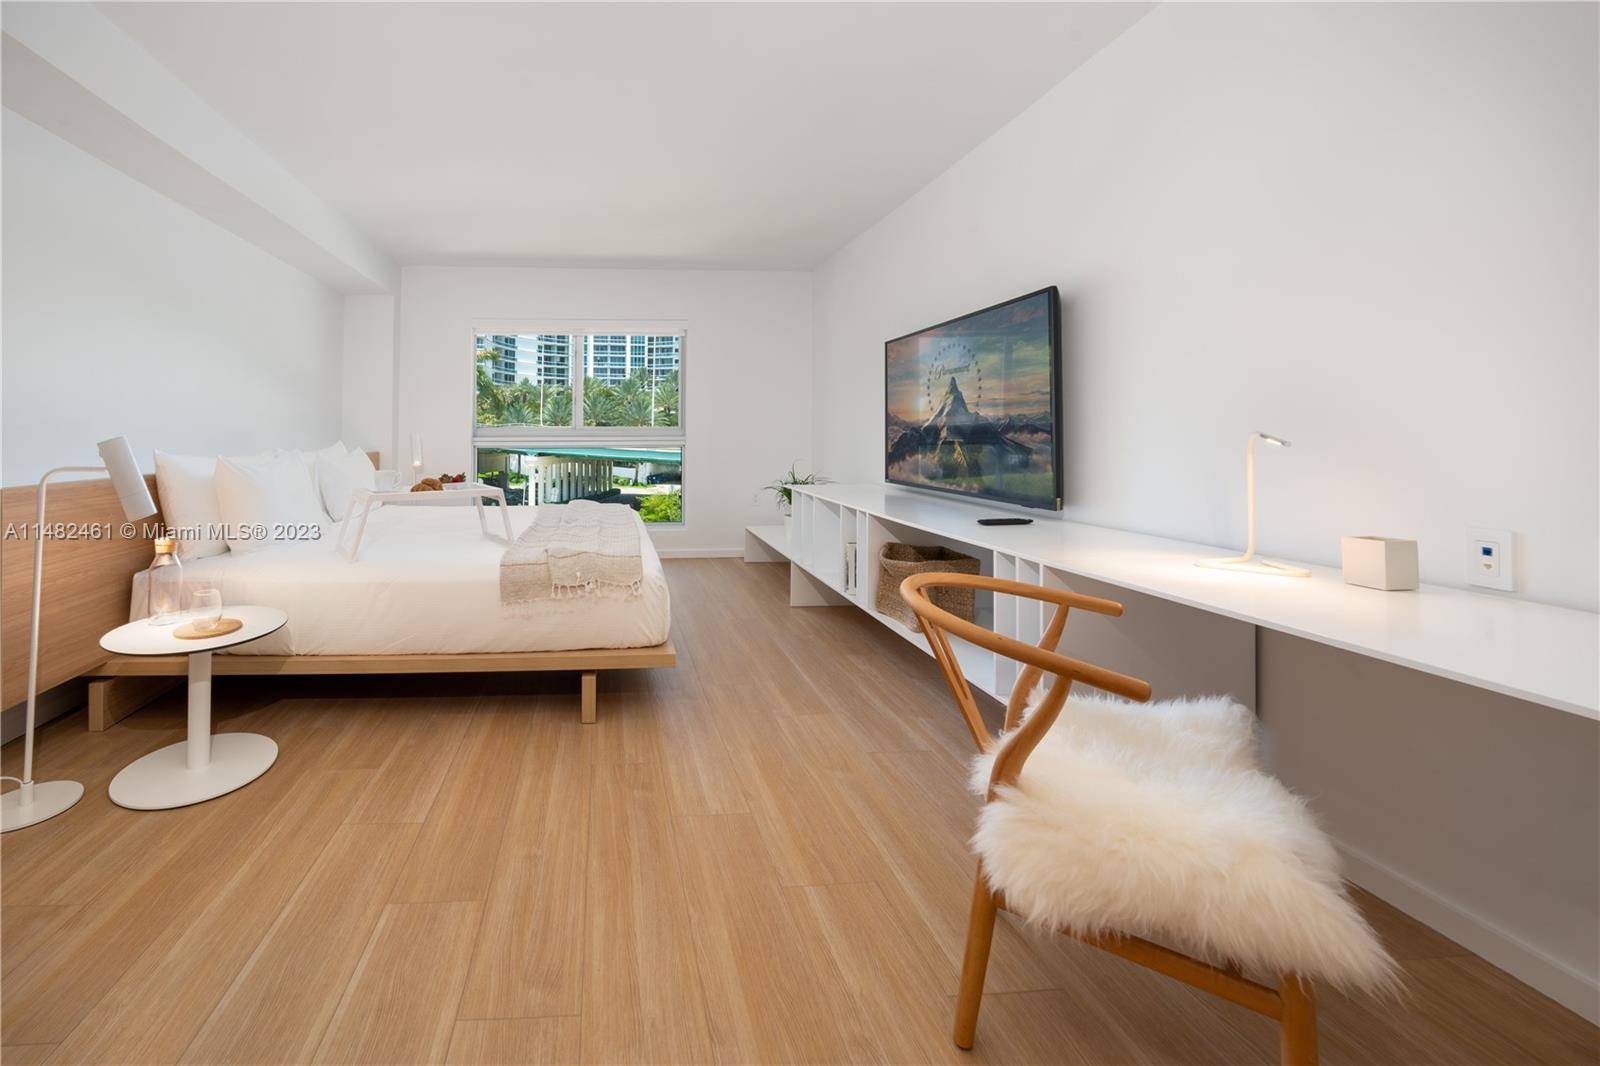 SHORT TERM RENTAL ! Secluded three story building in the exclusive Bal Harbour area accommodates studios, 1 2 bedroom units perfect for living or for an in between homes rental.